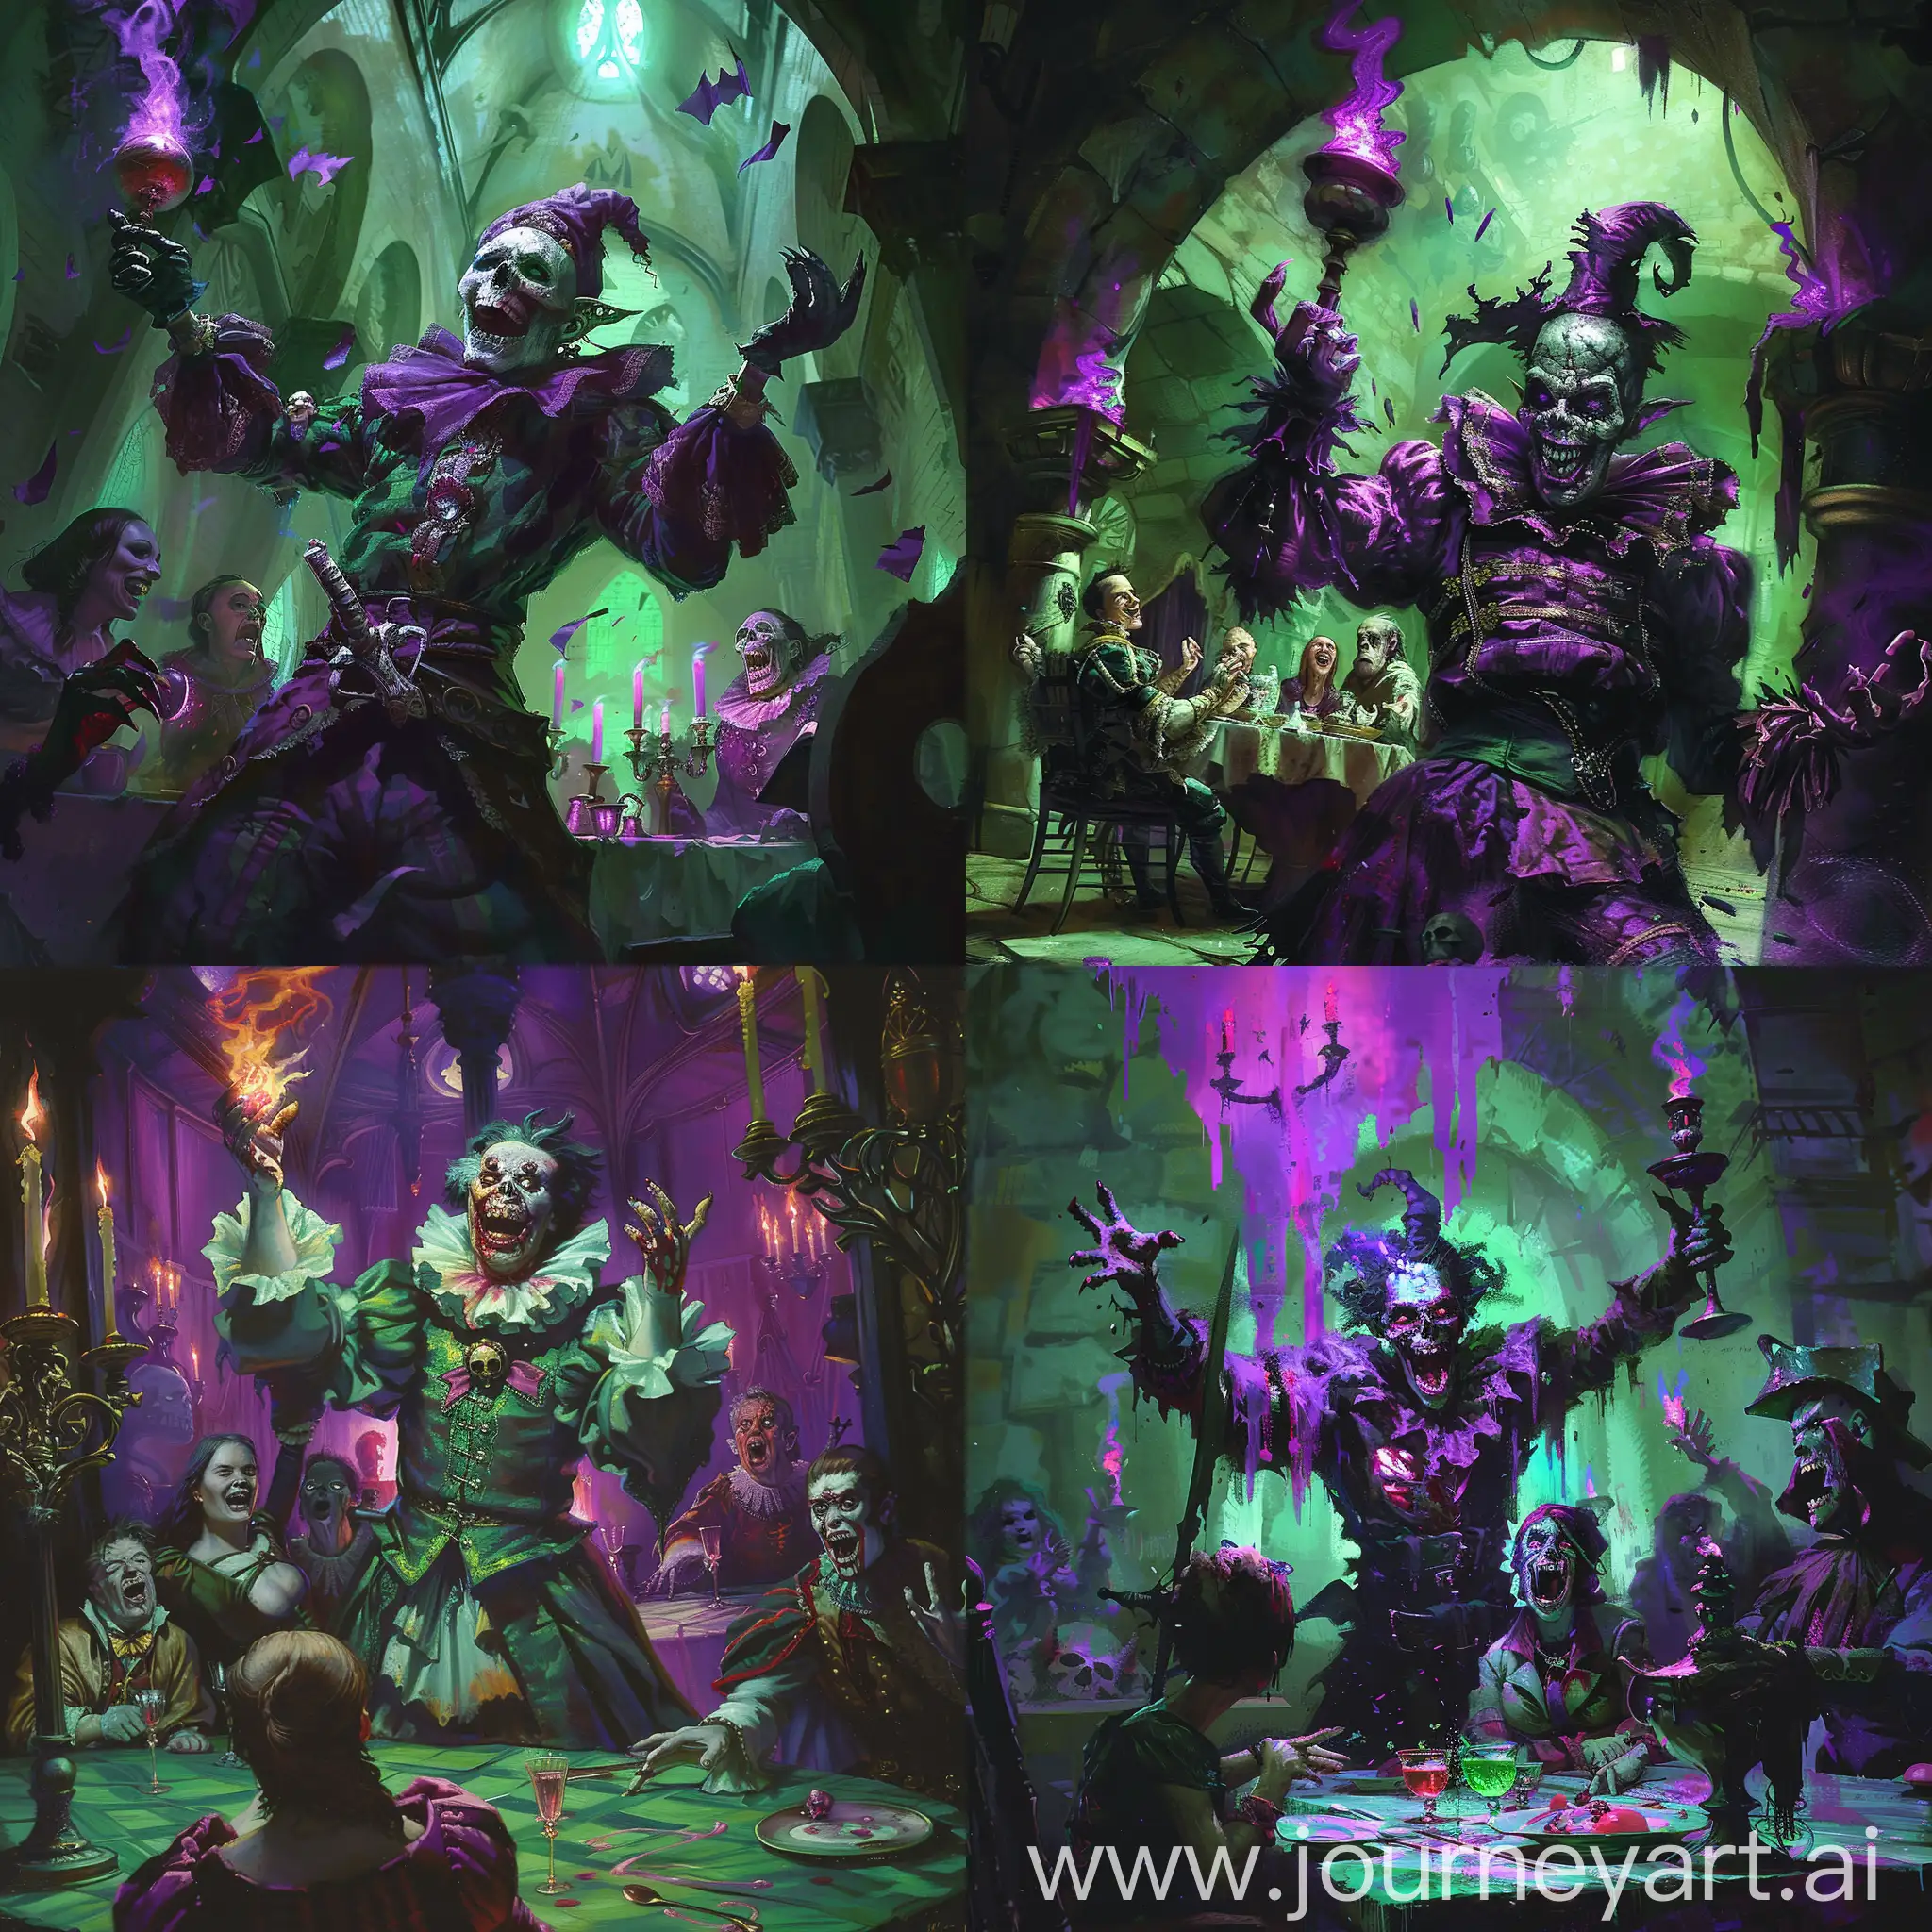 Sinister-Jester-with-Sword-and-Skull-in-Dark-PurplishGreen-Hall